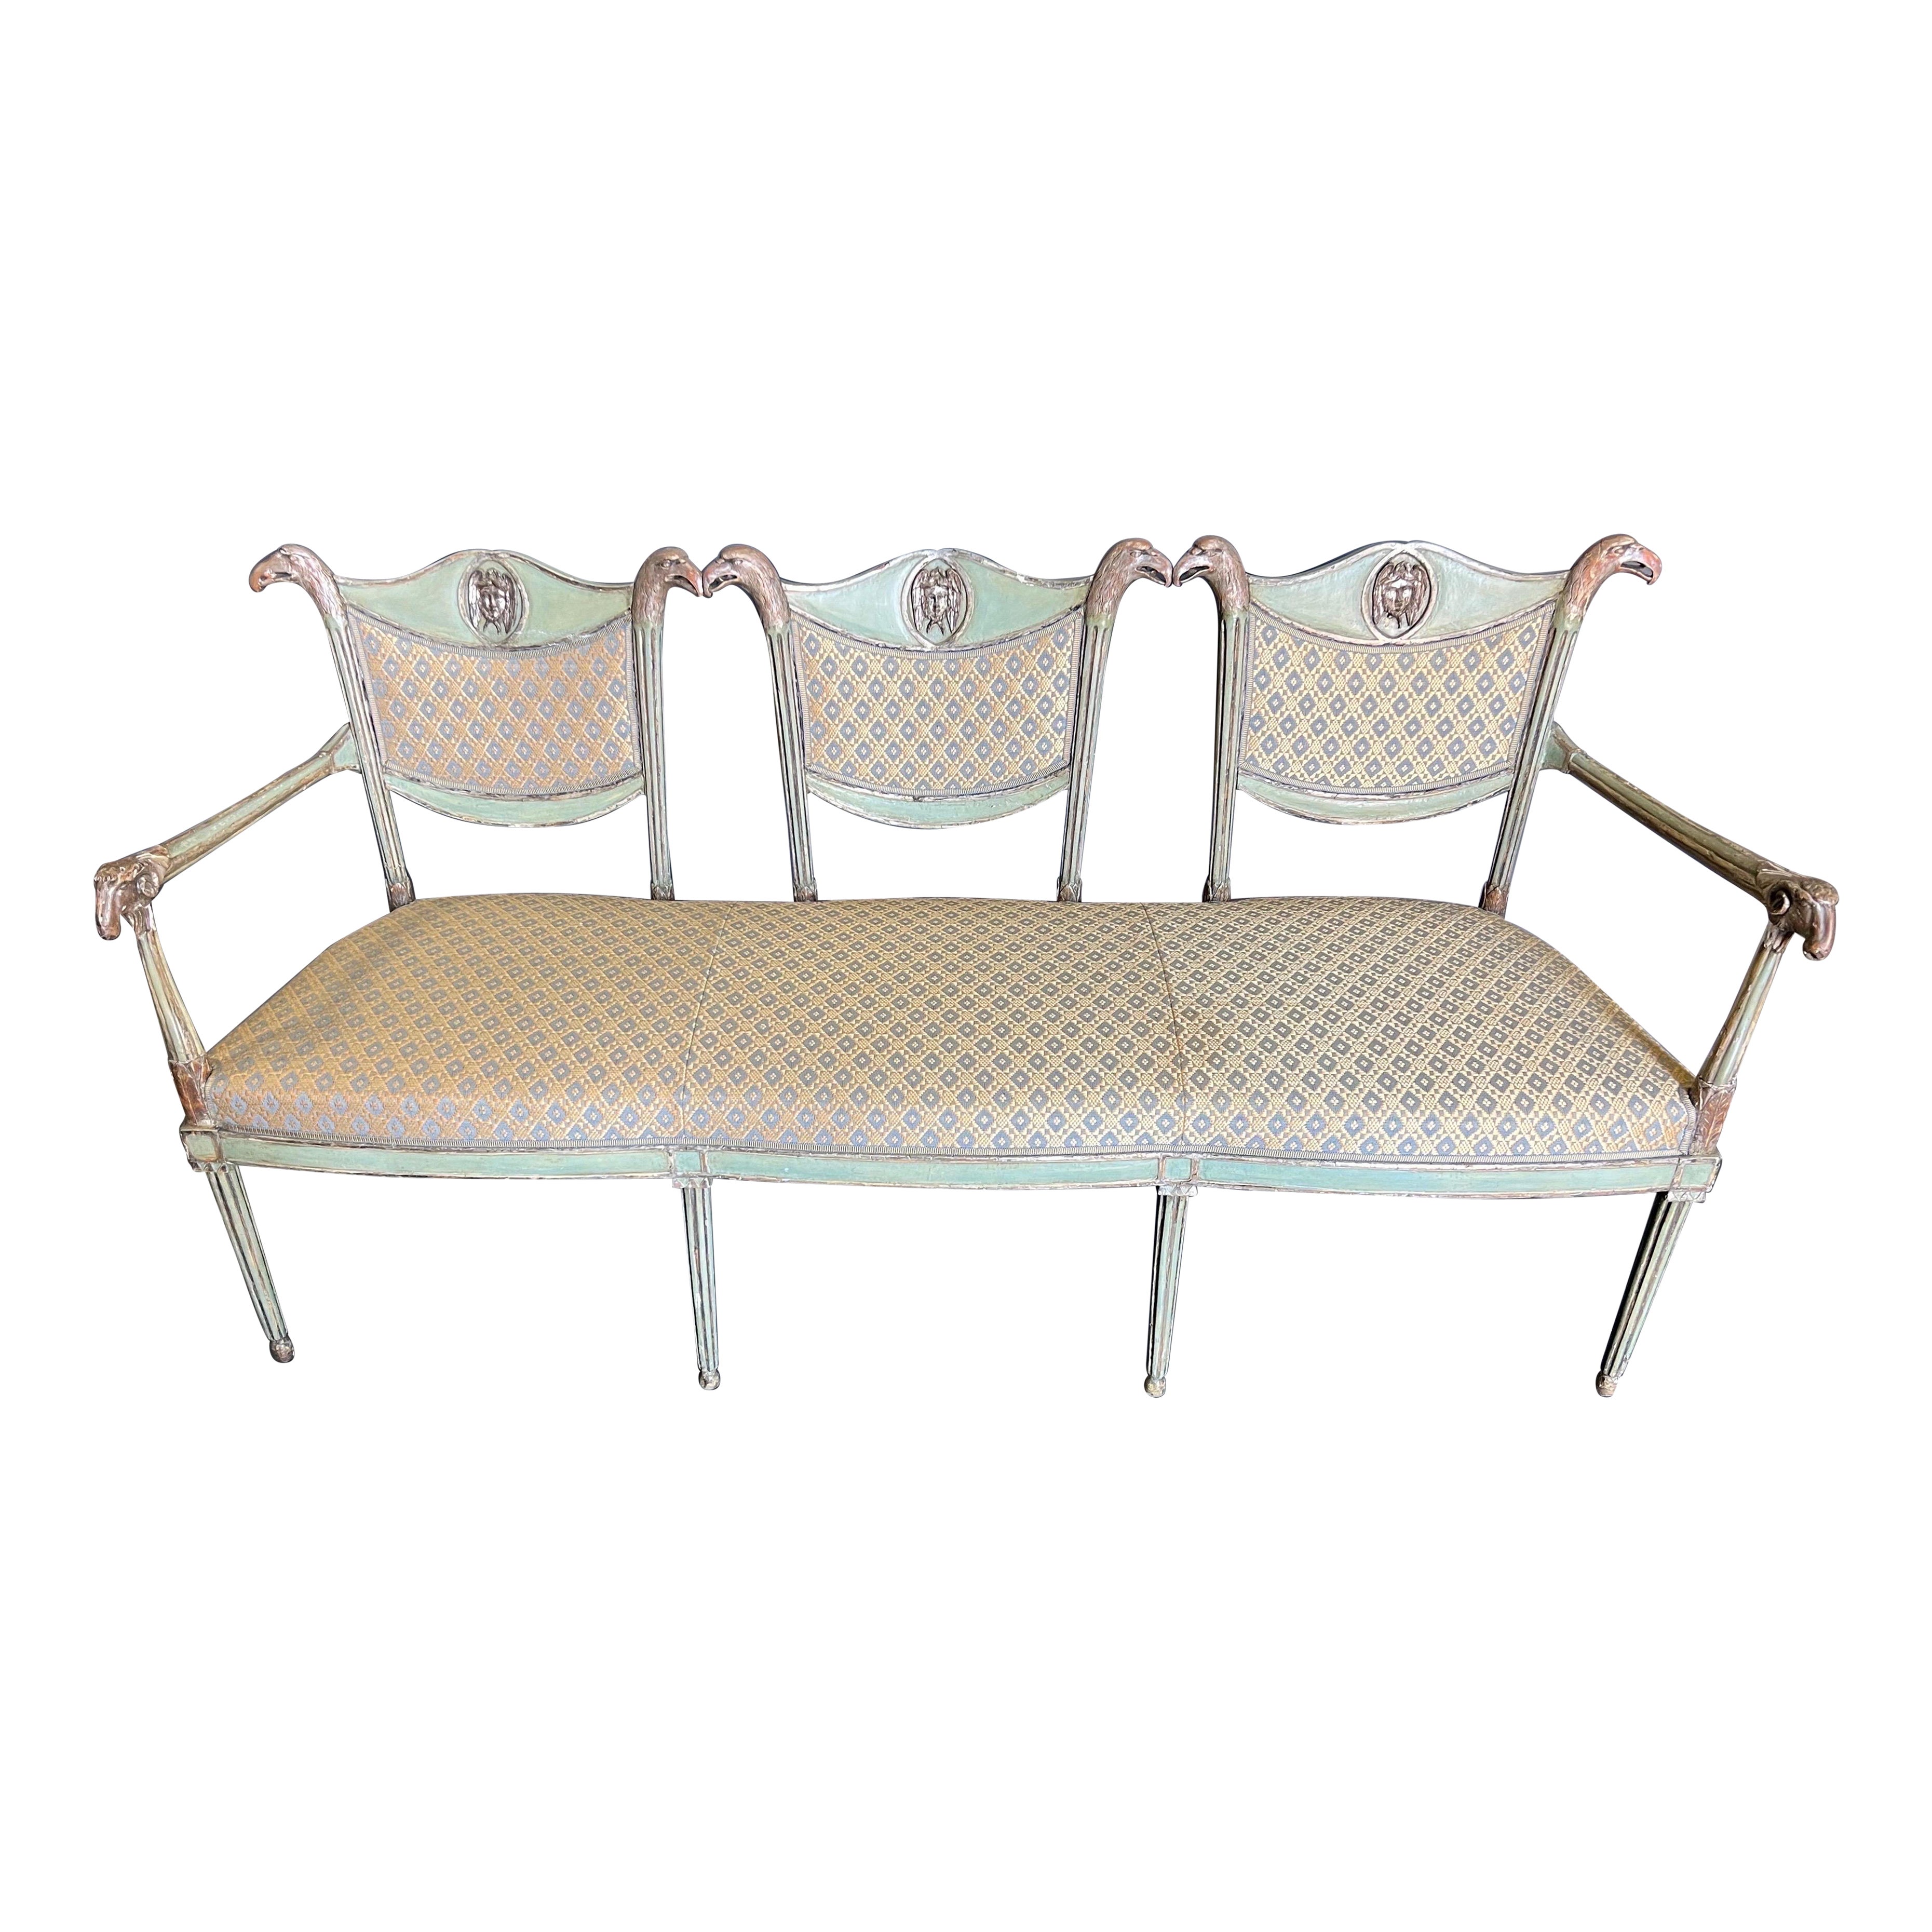 Fine Silver Leaf & Painted 19th Century French Neoclassical Settee with Eagles